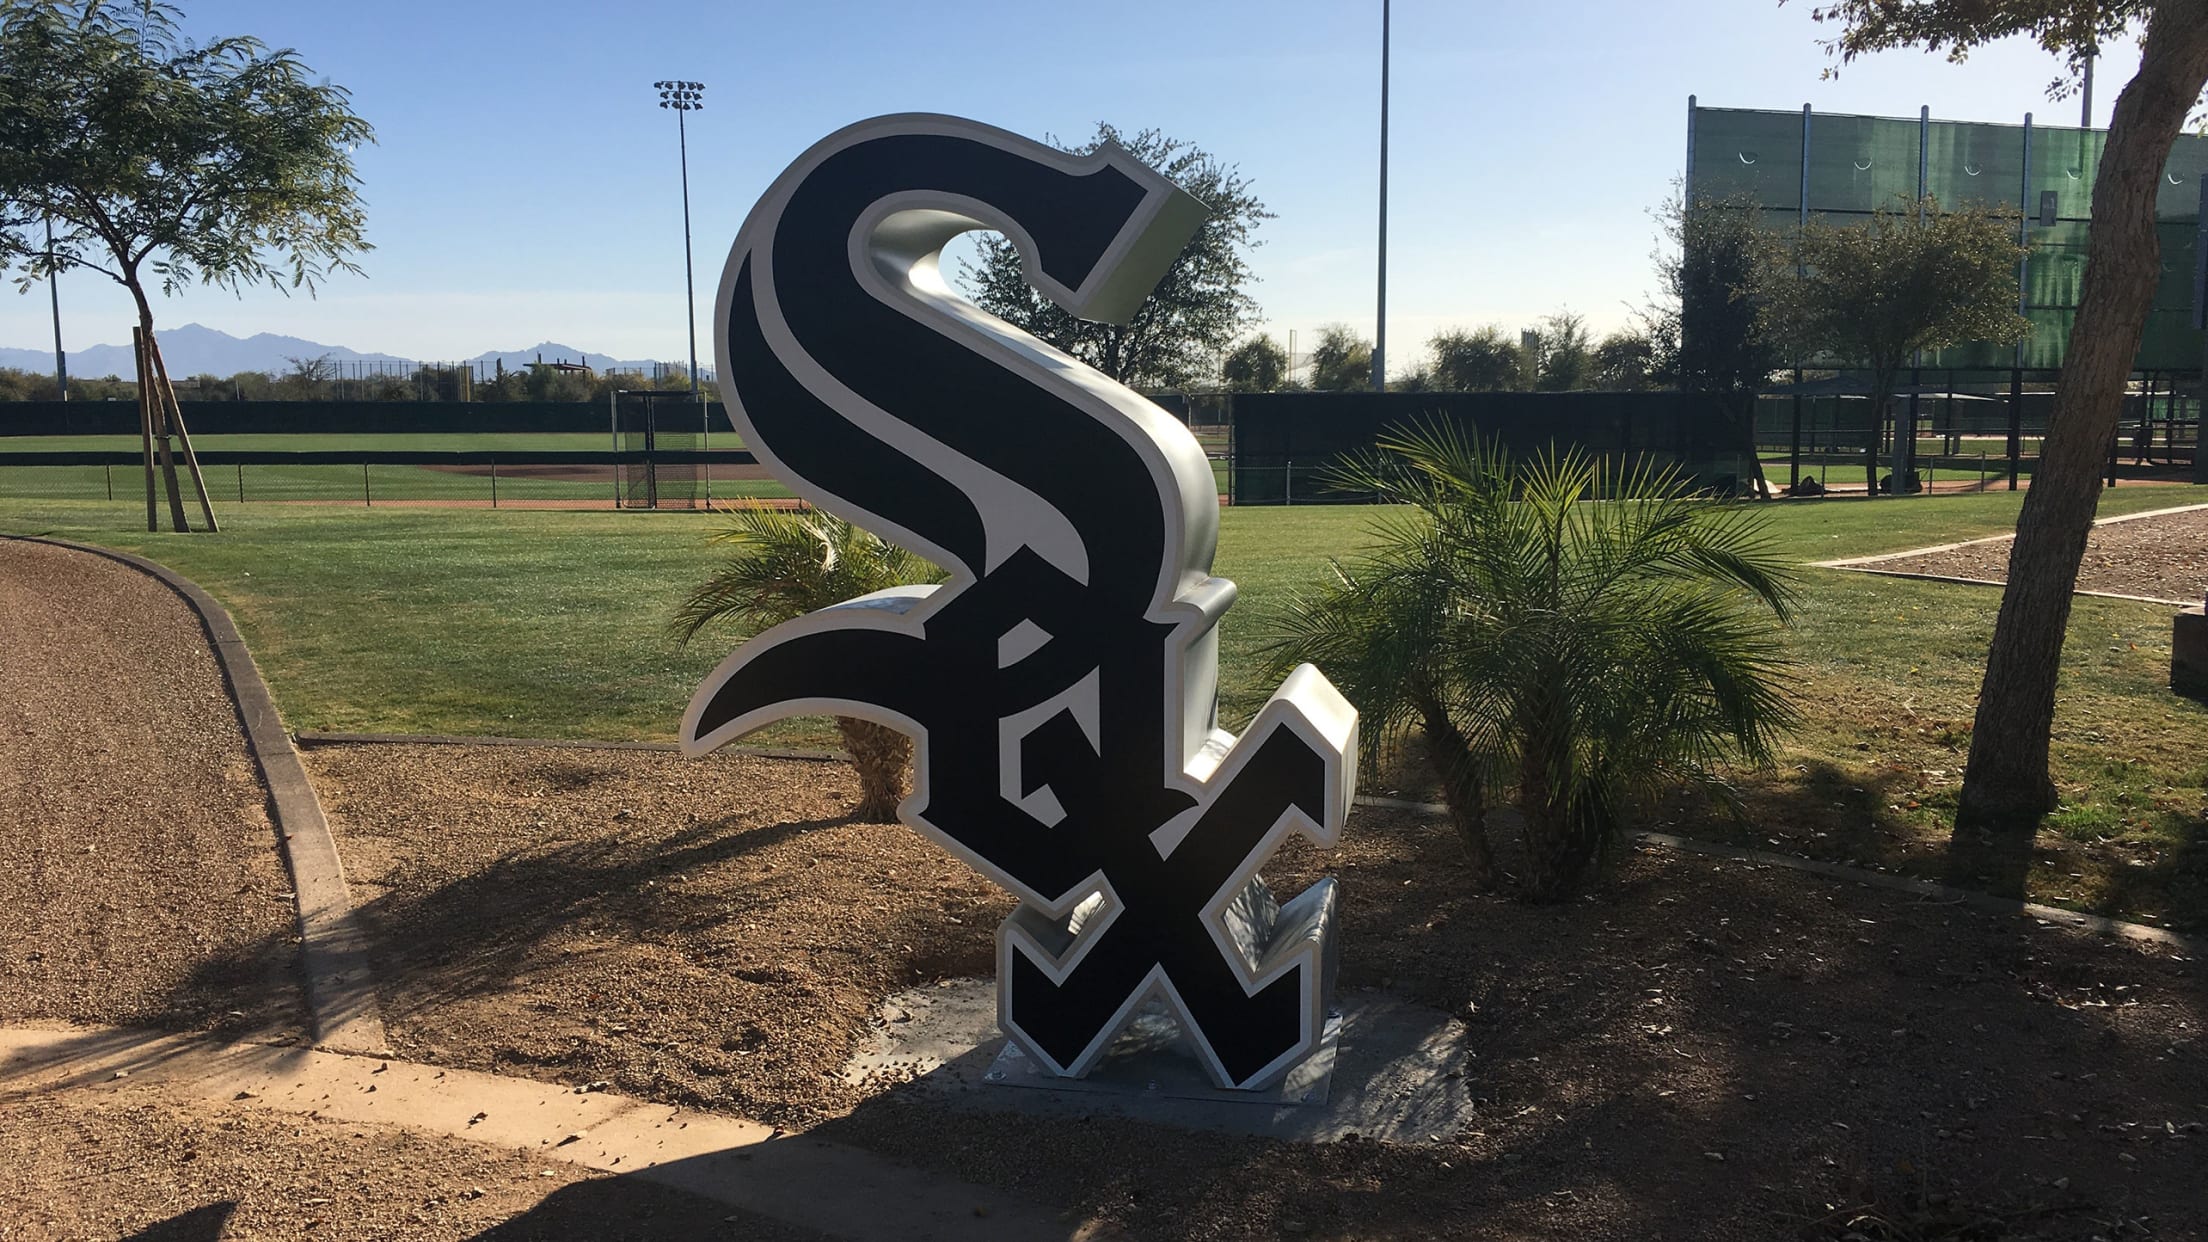 White Sox Spring Training at Camelback Ranch - Glendale